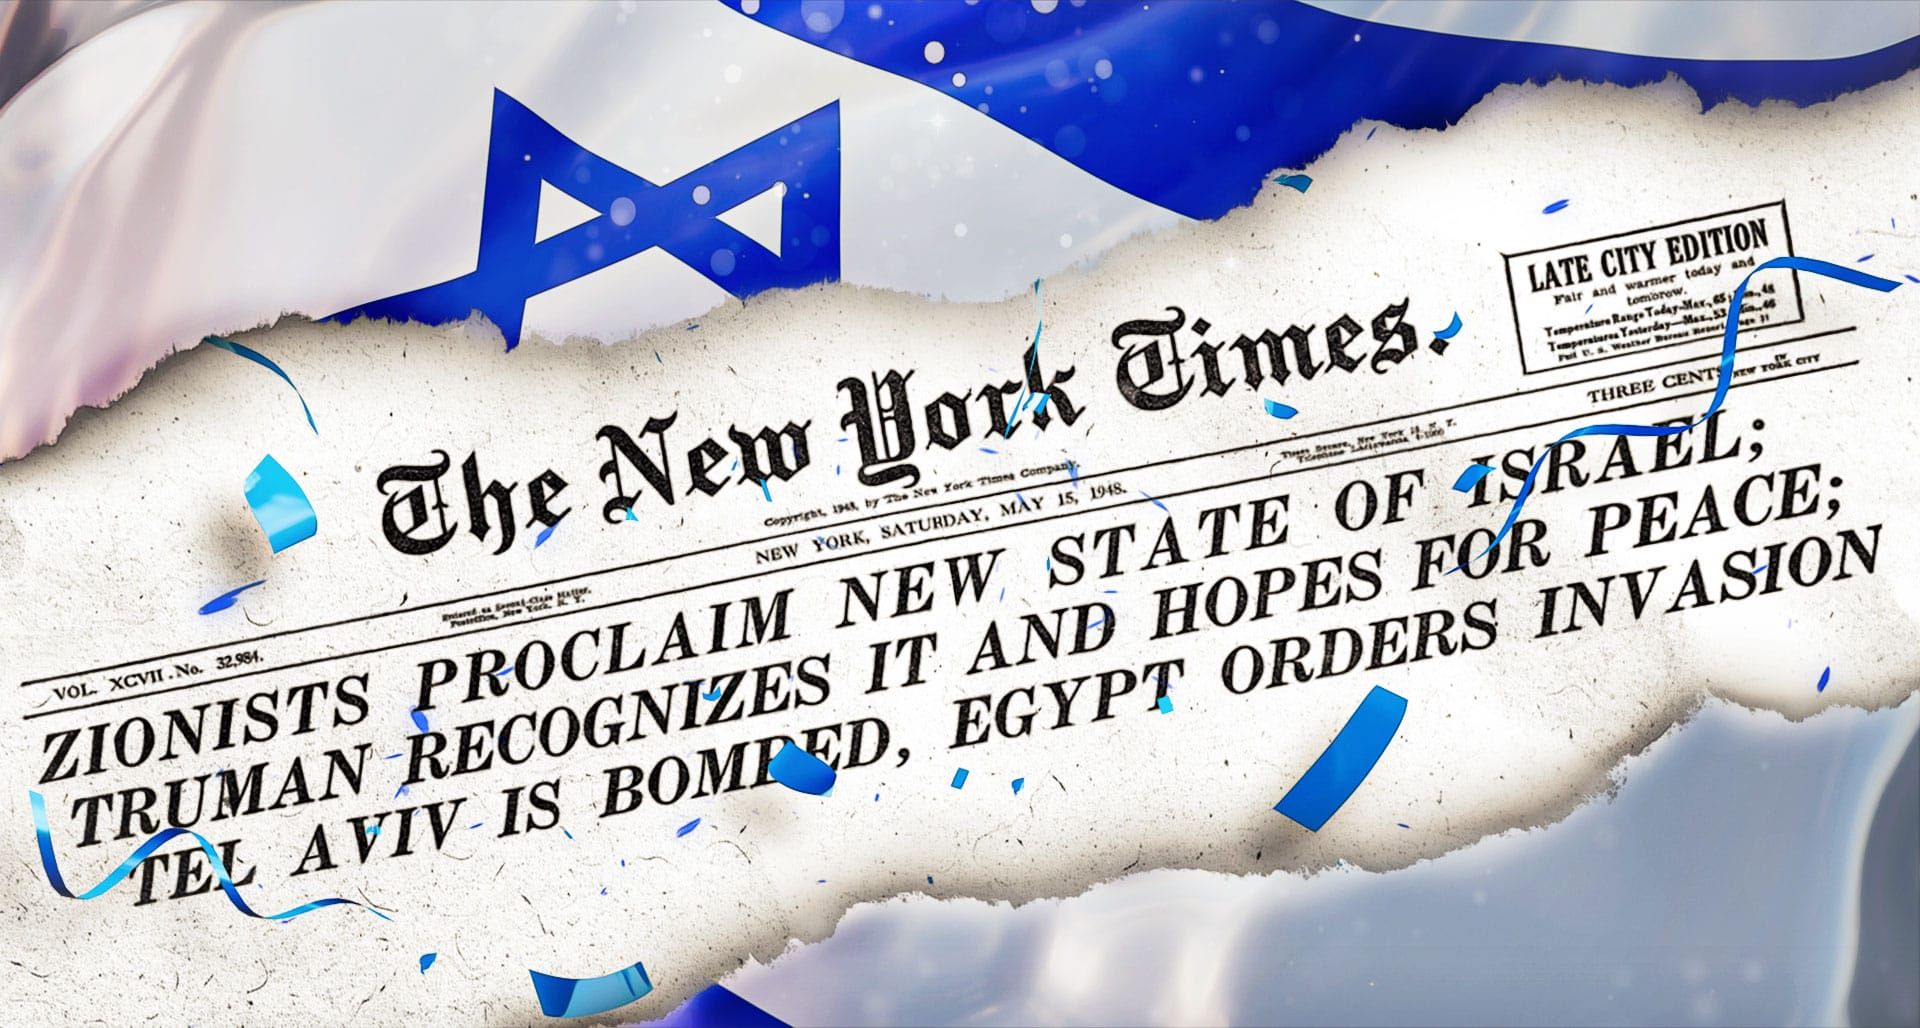 Israeli independence in the media